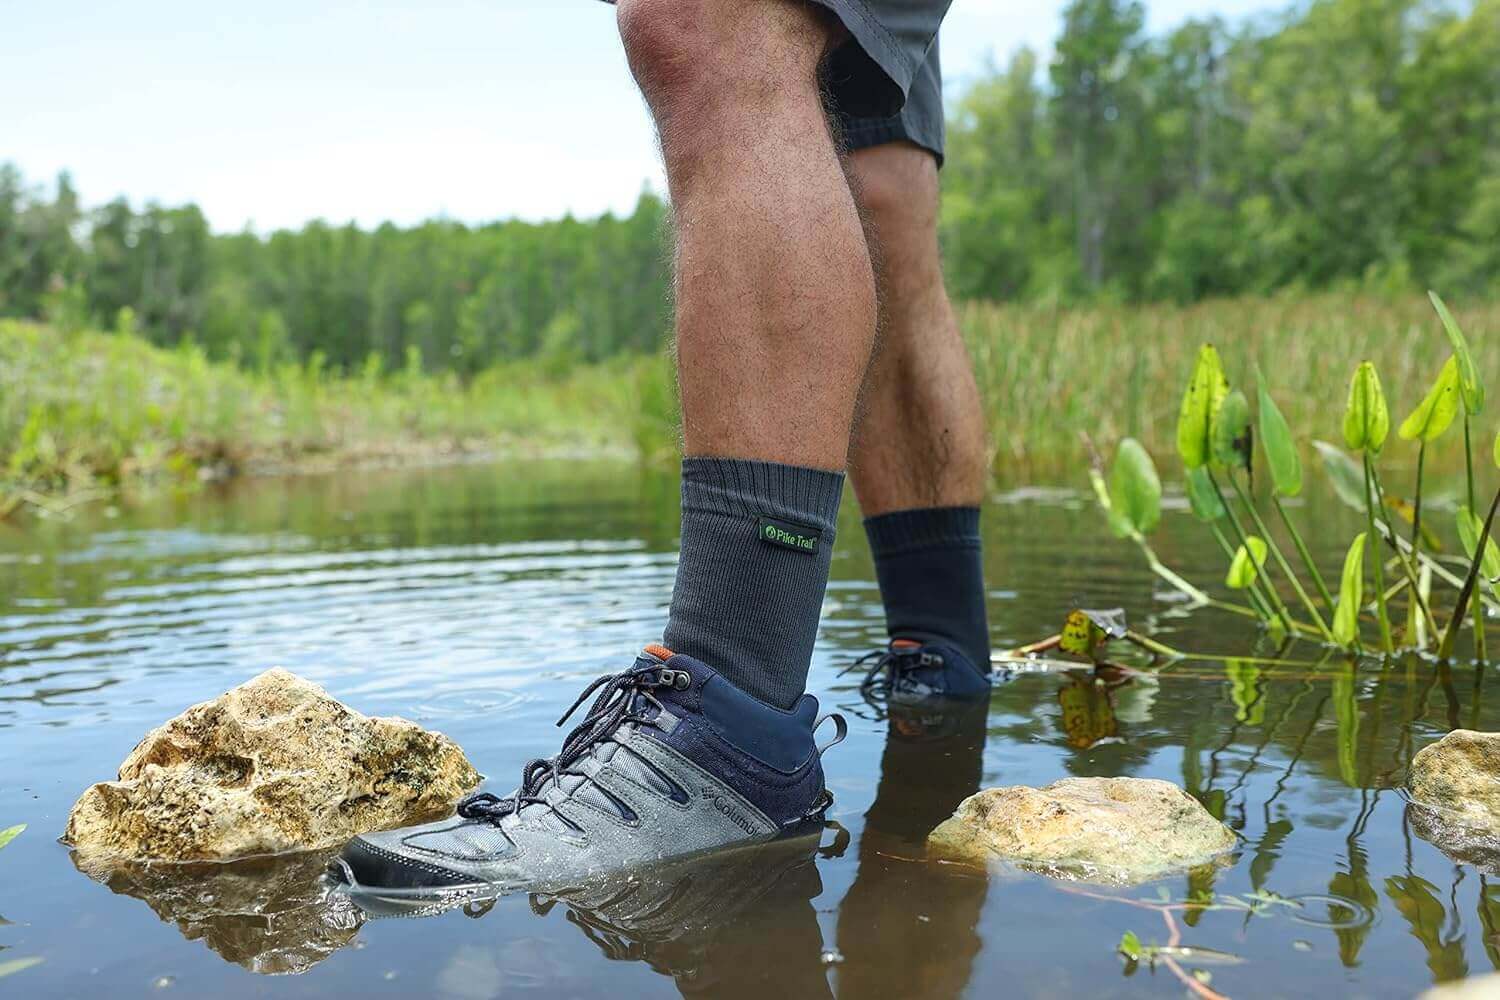 Shop The Latest >100% Waterproof Breathable Socks for Hiking & Trekking > *Only $33.74*> From The Top Brand > *Pike Traill* > Shop Now and Get Free Shipping On Orders Over $45.00 >*Shop Earth Foot*